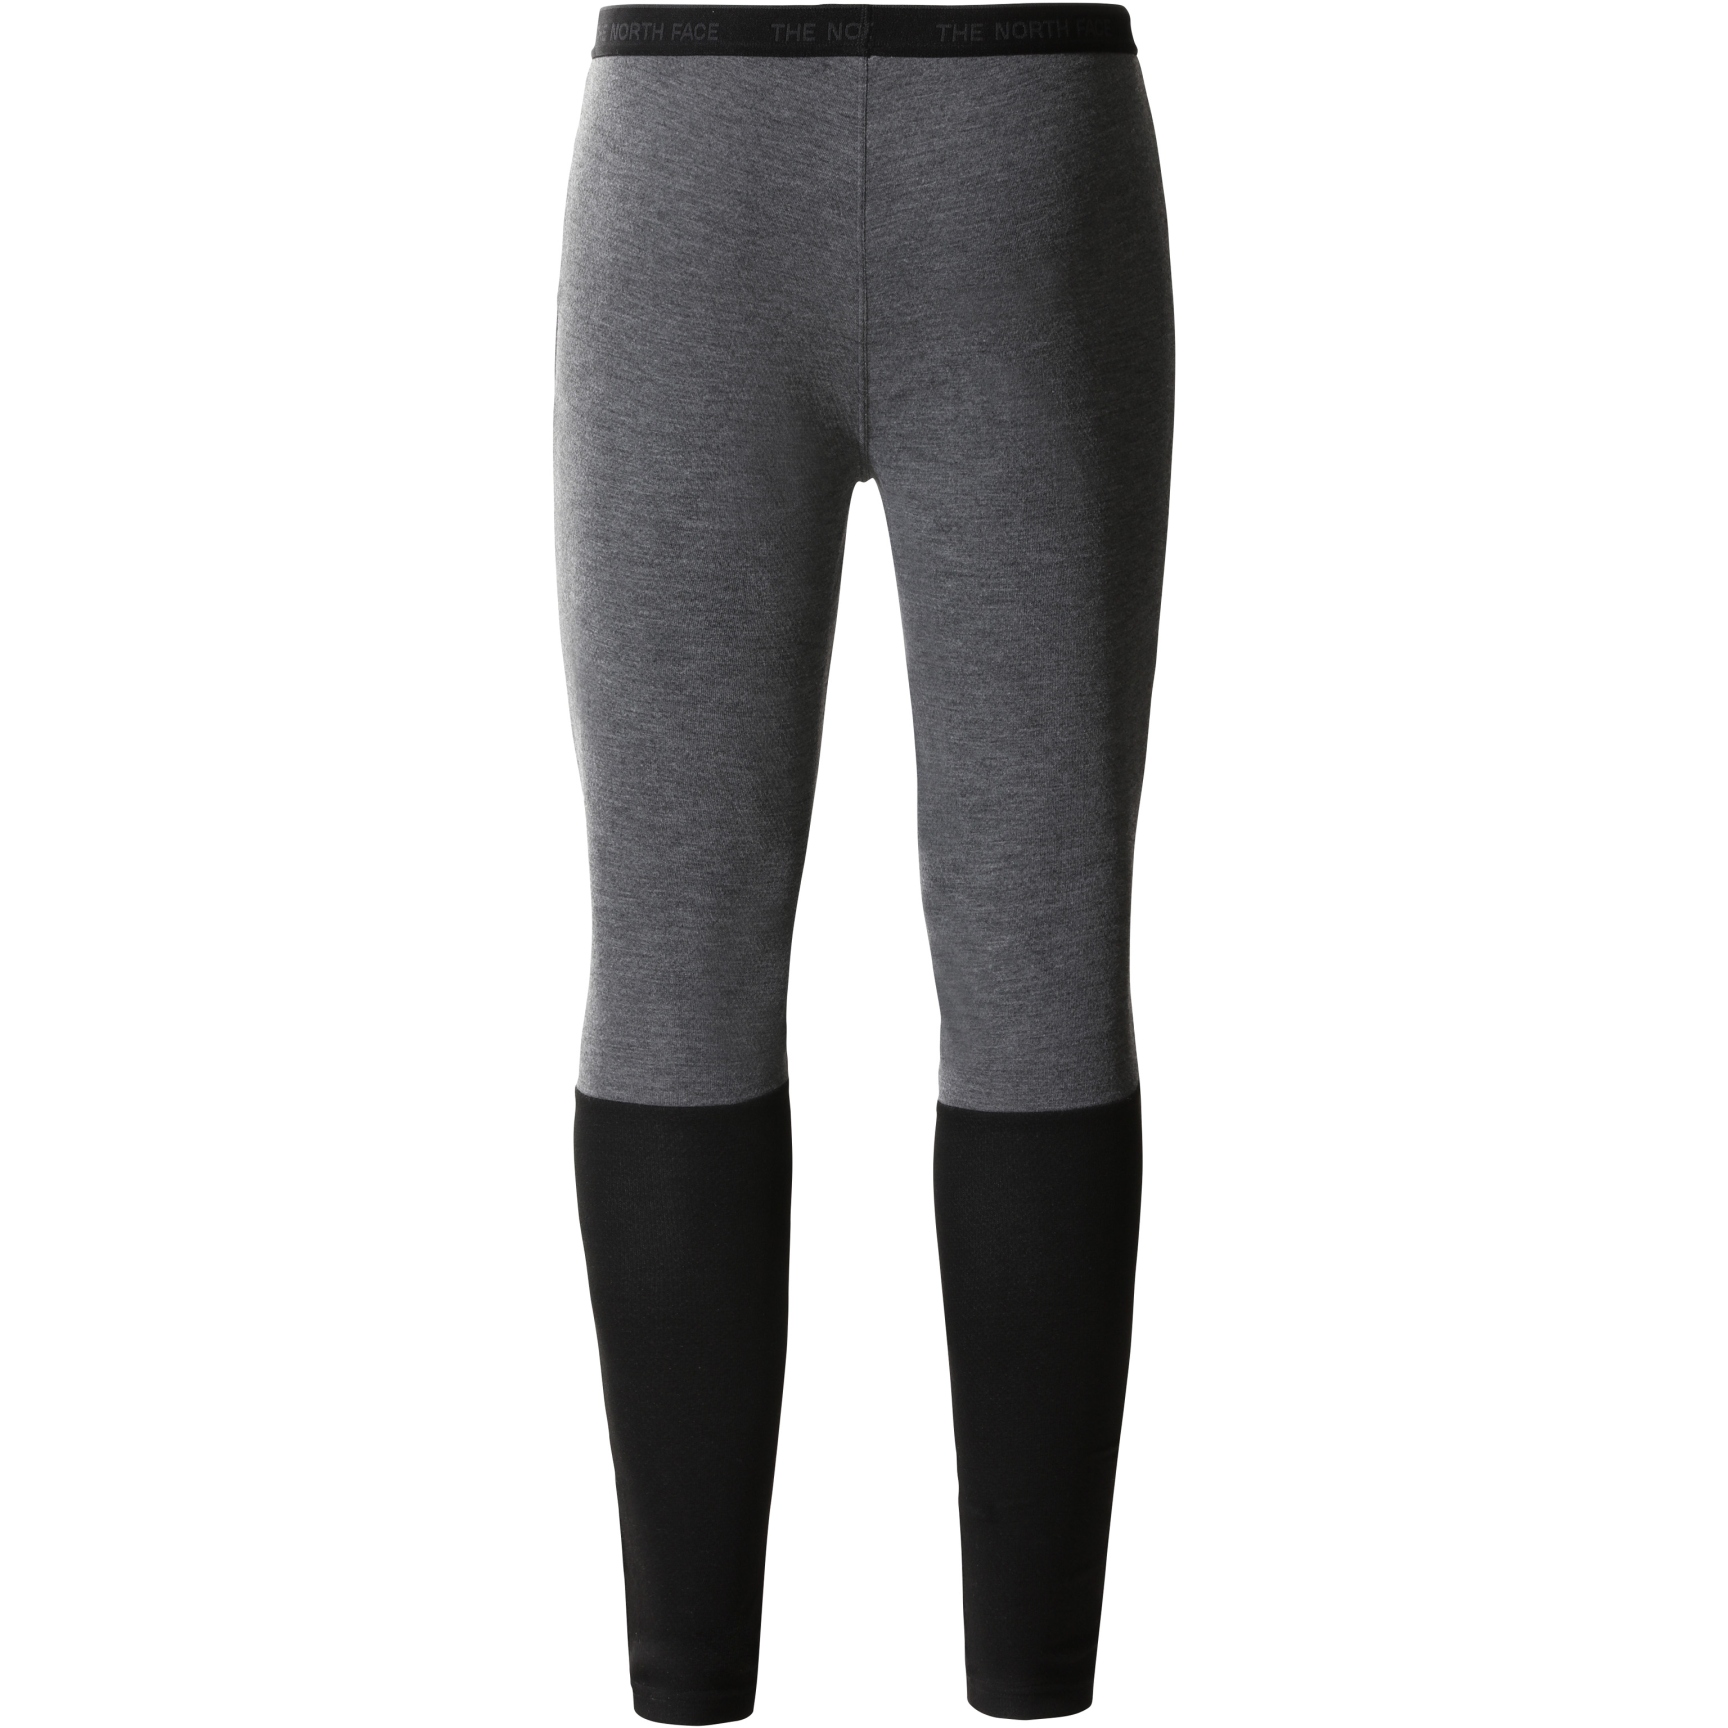 What to Wear Over Thermal Underwear? Tips for Staying Warm | Blog 4F